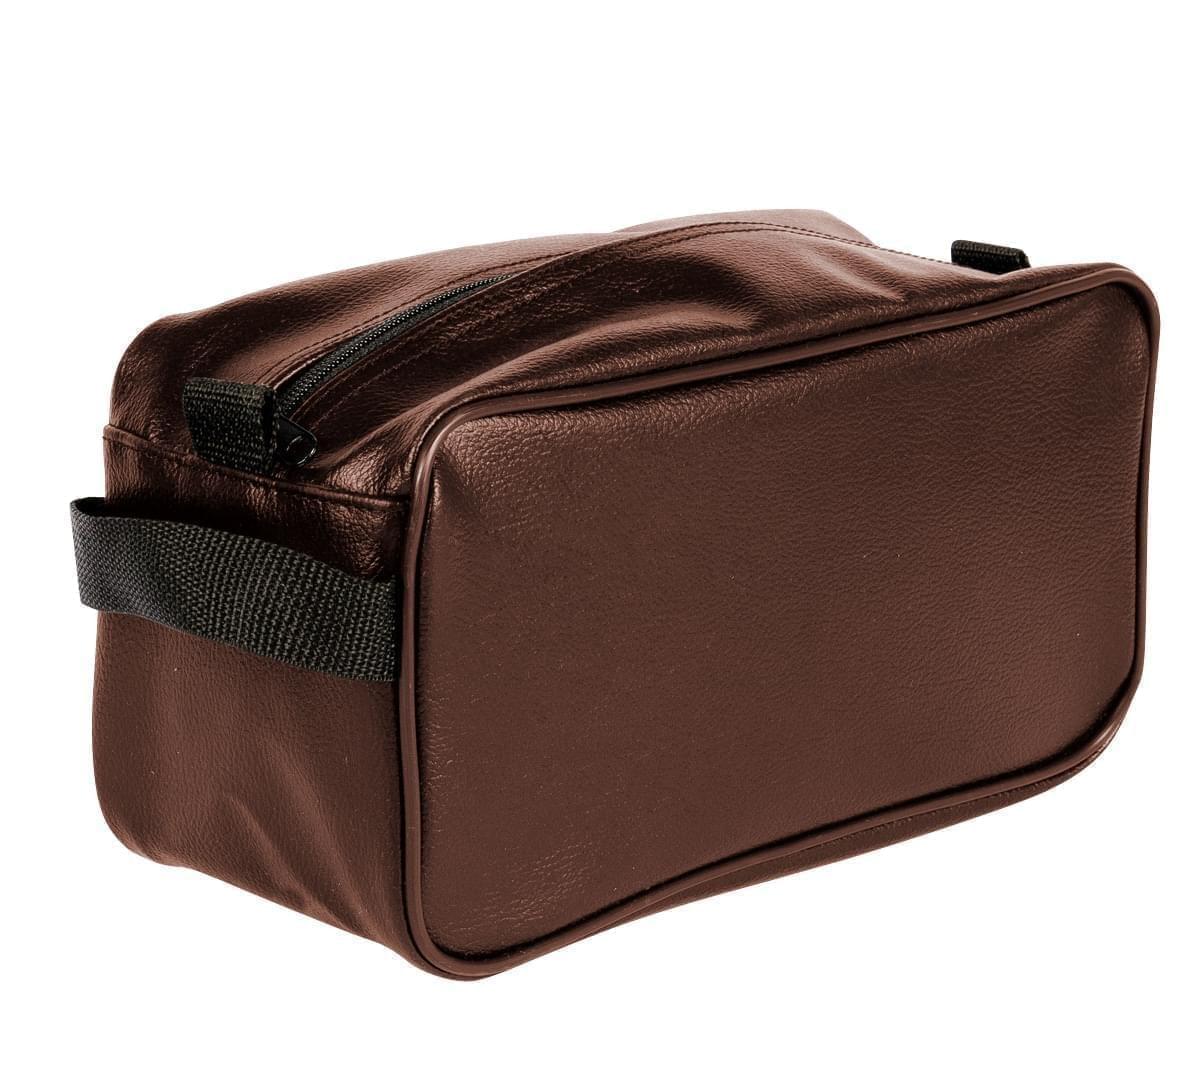 USA Made Cosmetic & Toiletry Cases, Brown-Black, 3000996-APR